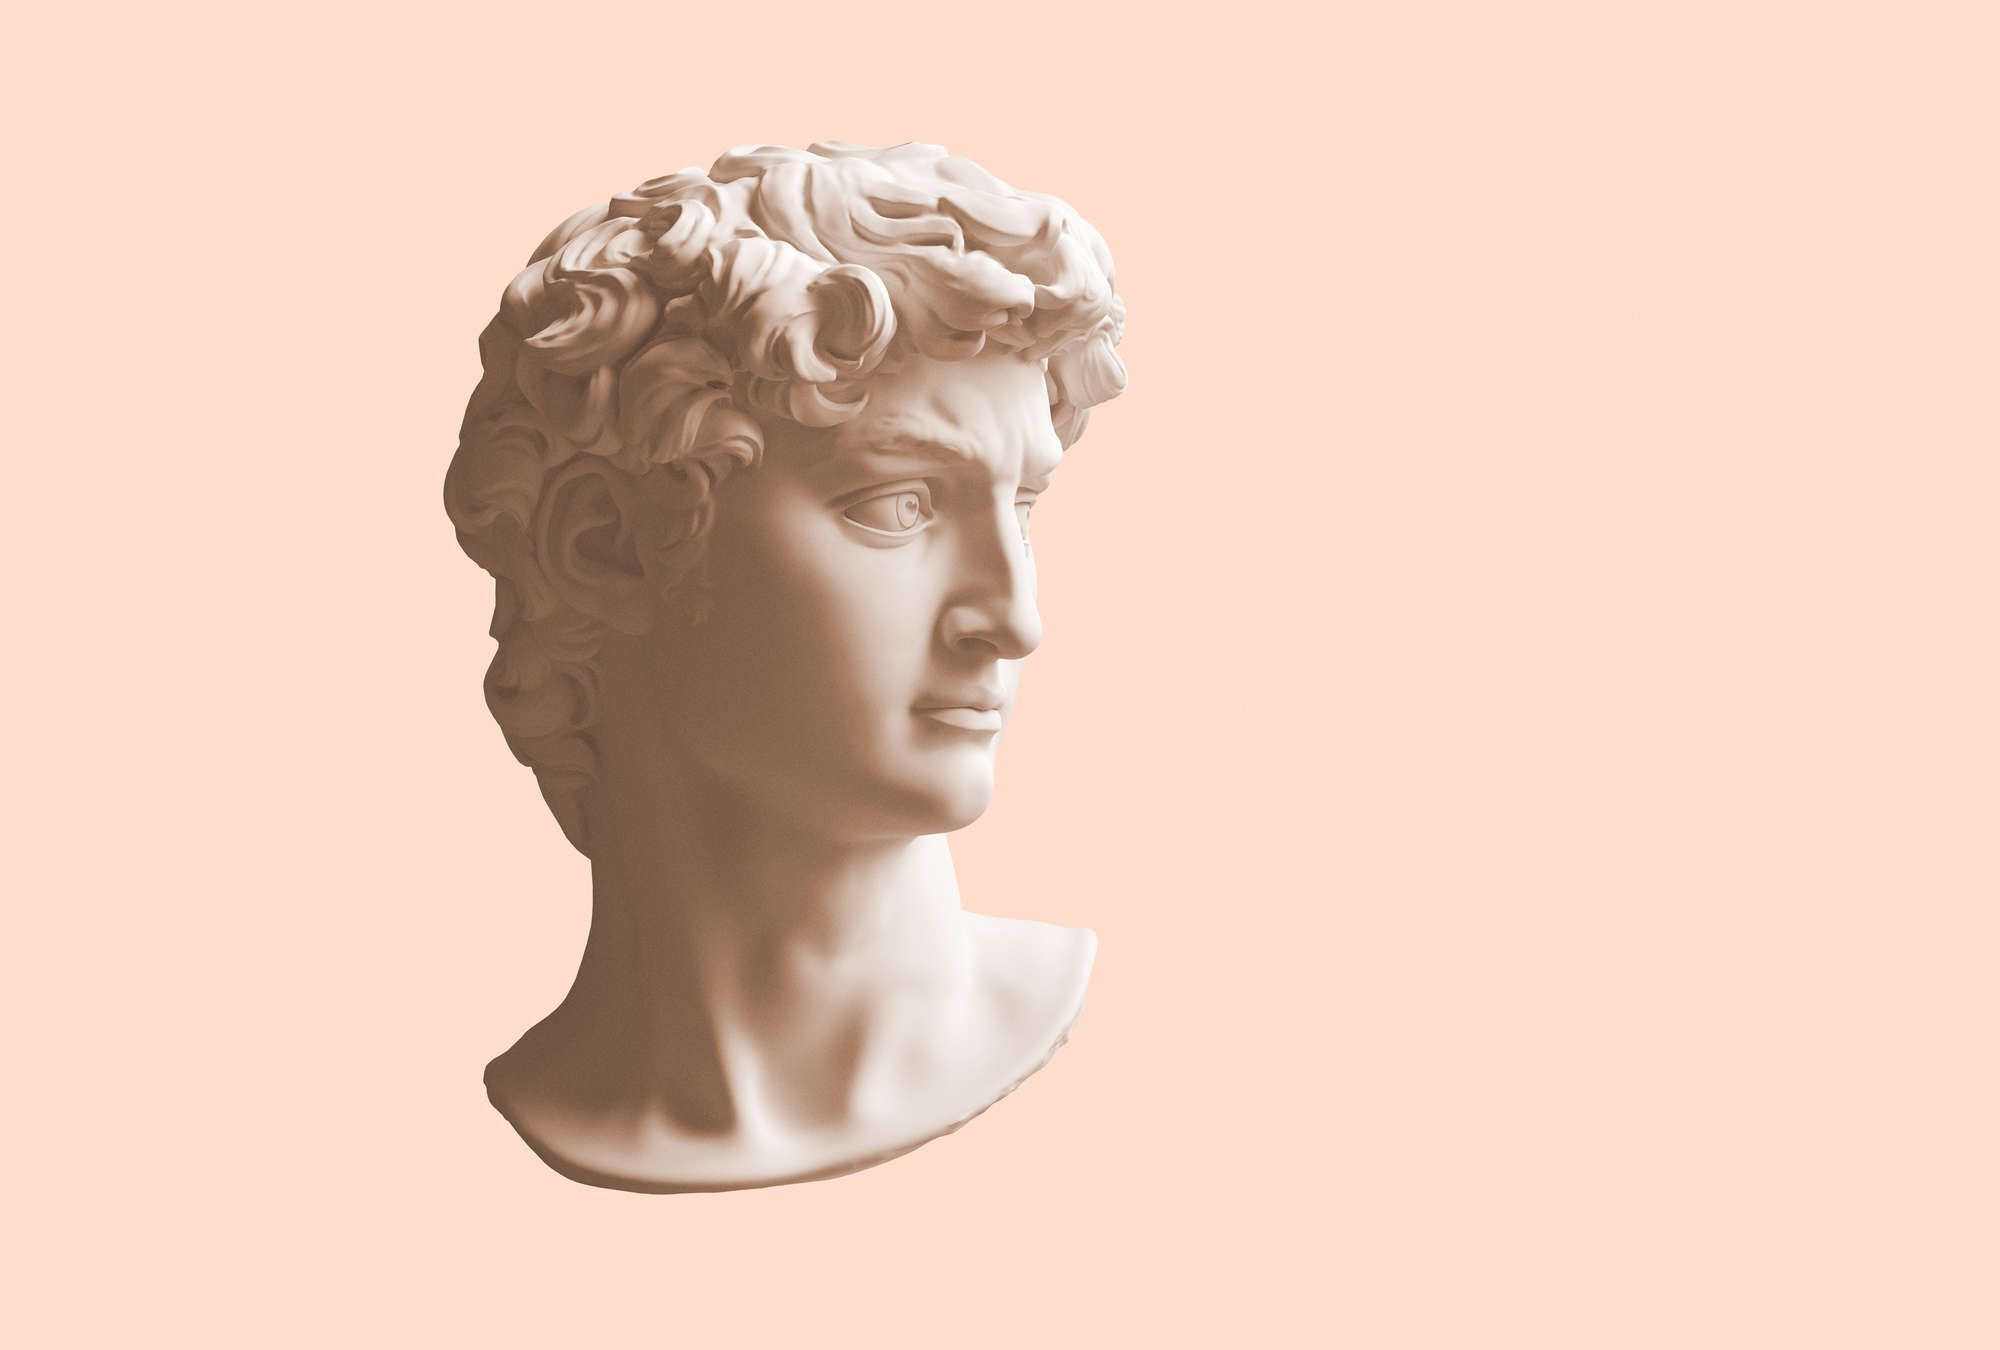             Photo wallpaper »mars« - antique male bust - Smooth, slightly pearly shimmering non-woven fabric
        